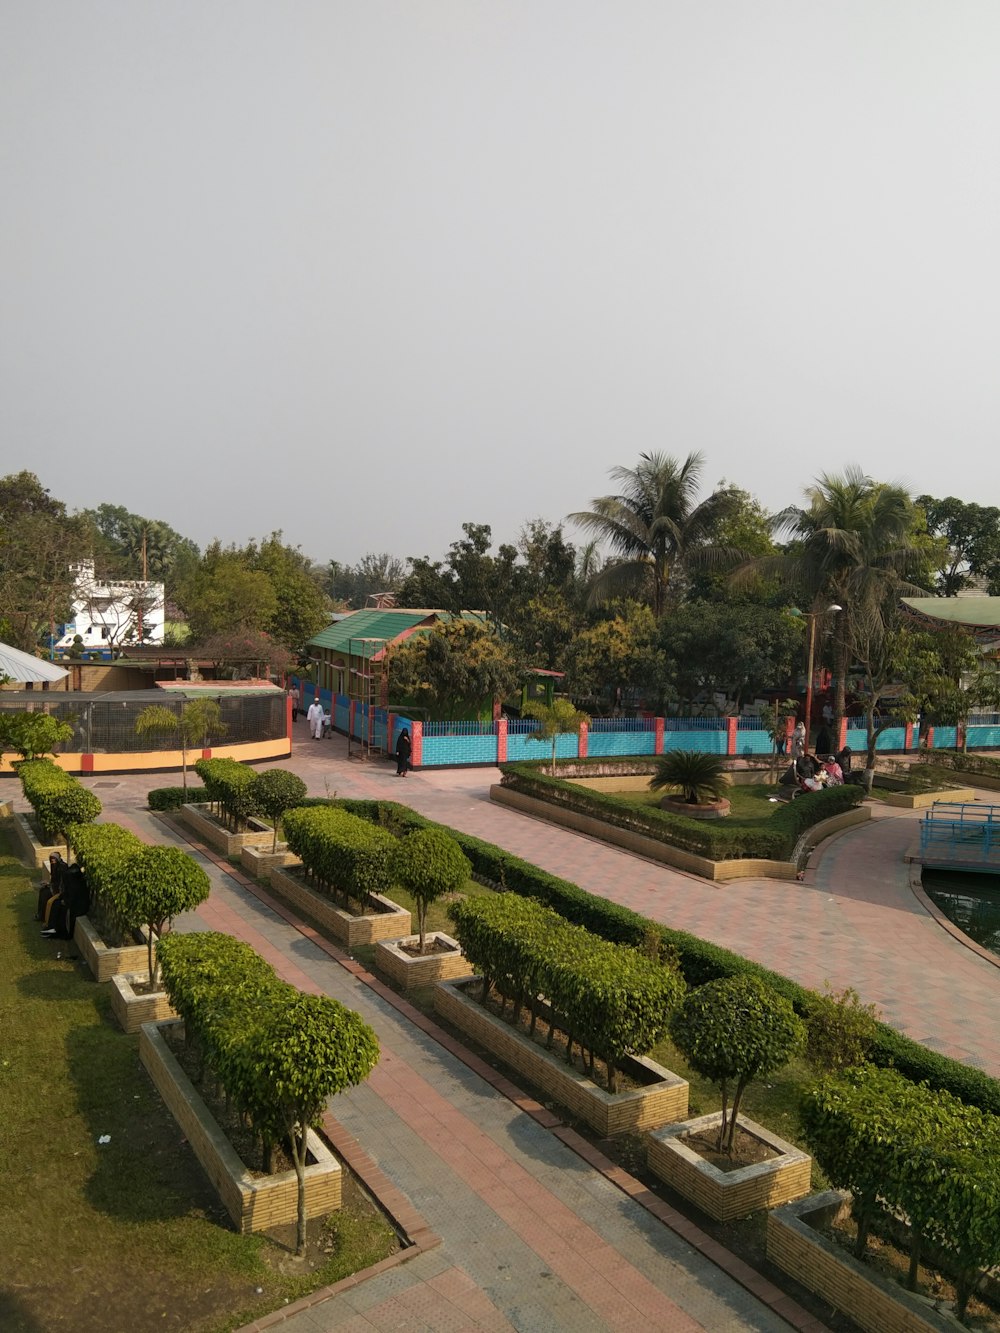 a view of a park with a pool in the middle of it